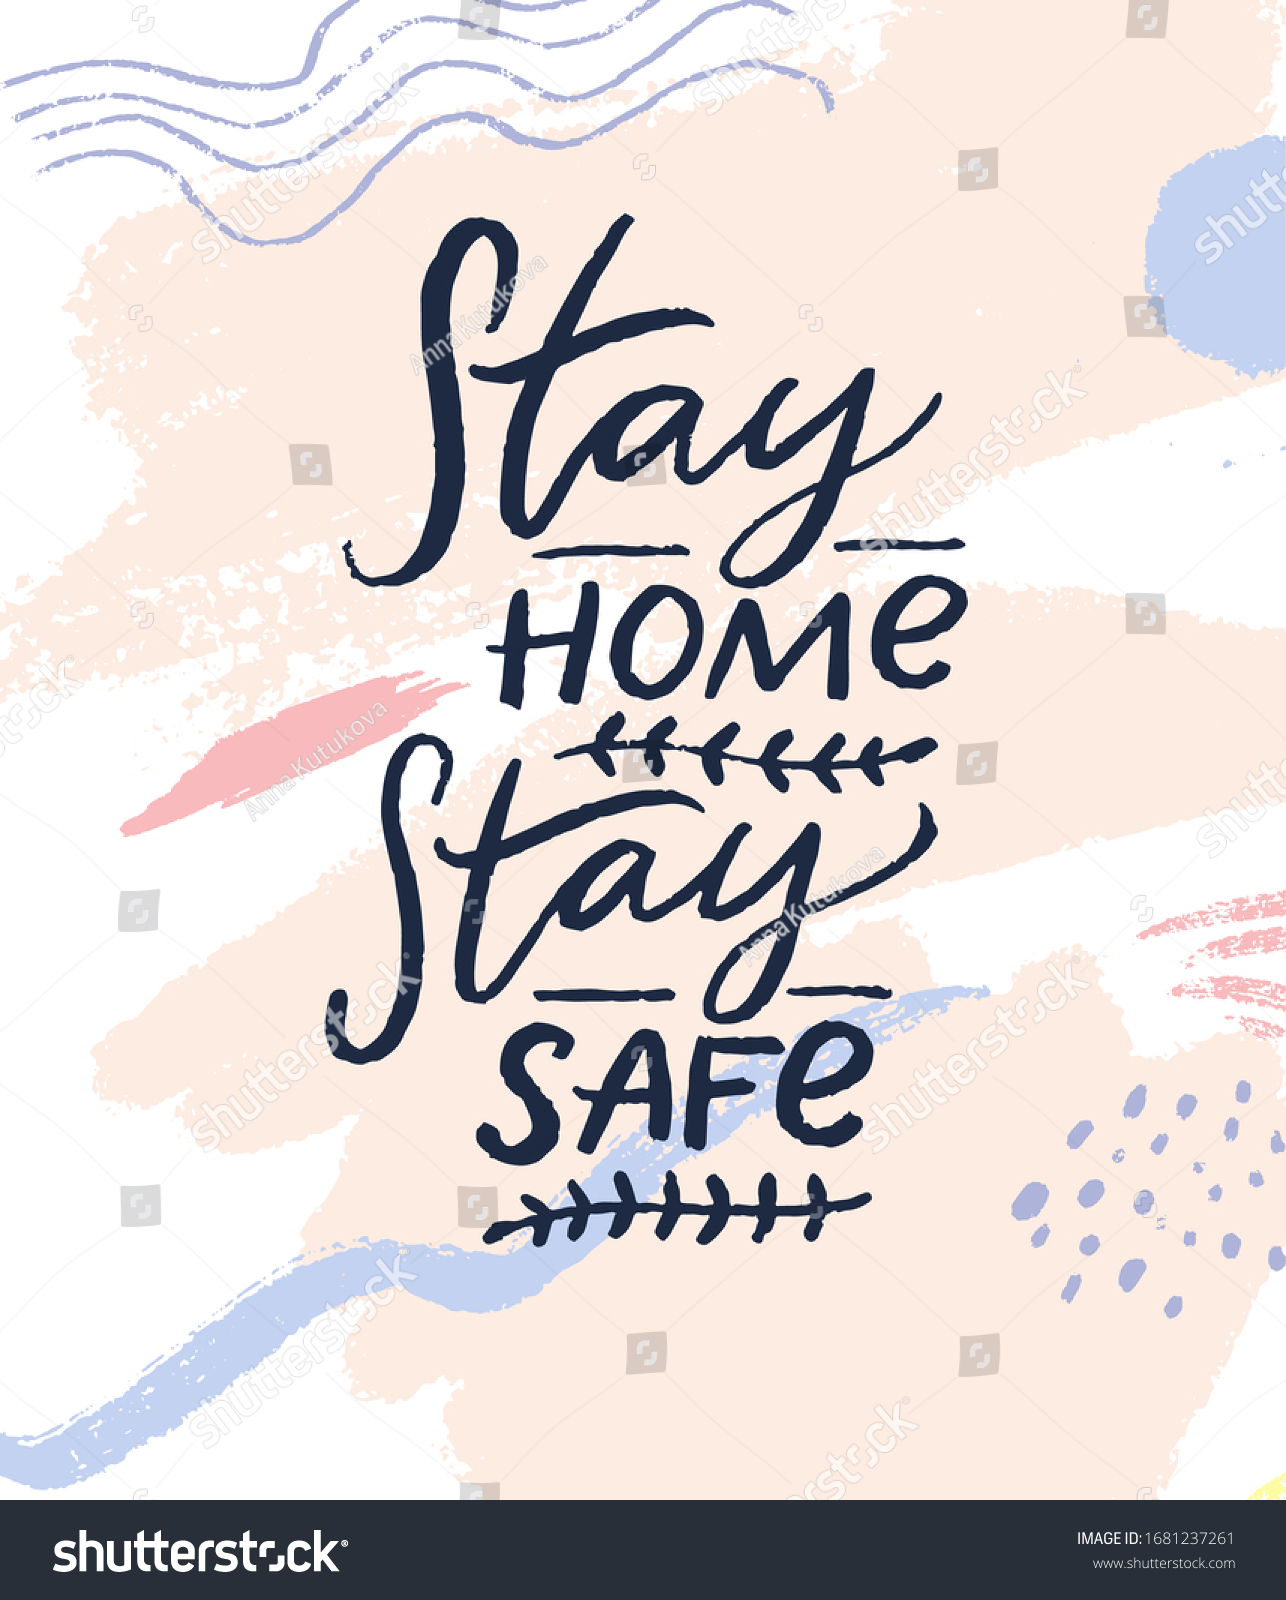 Stay home stay safe quotes